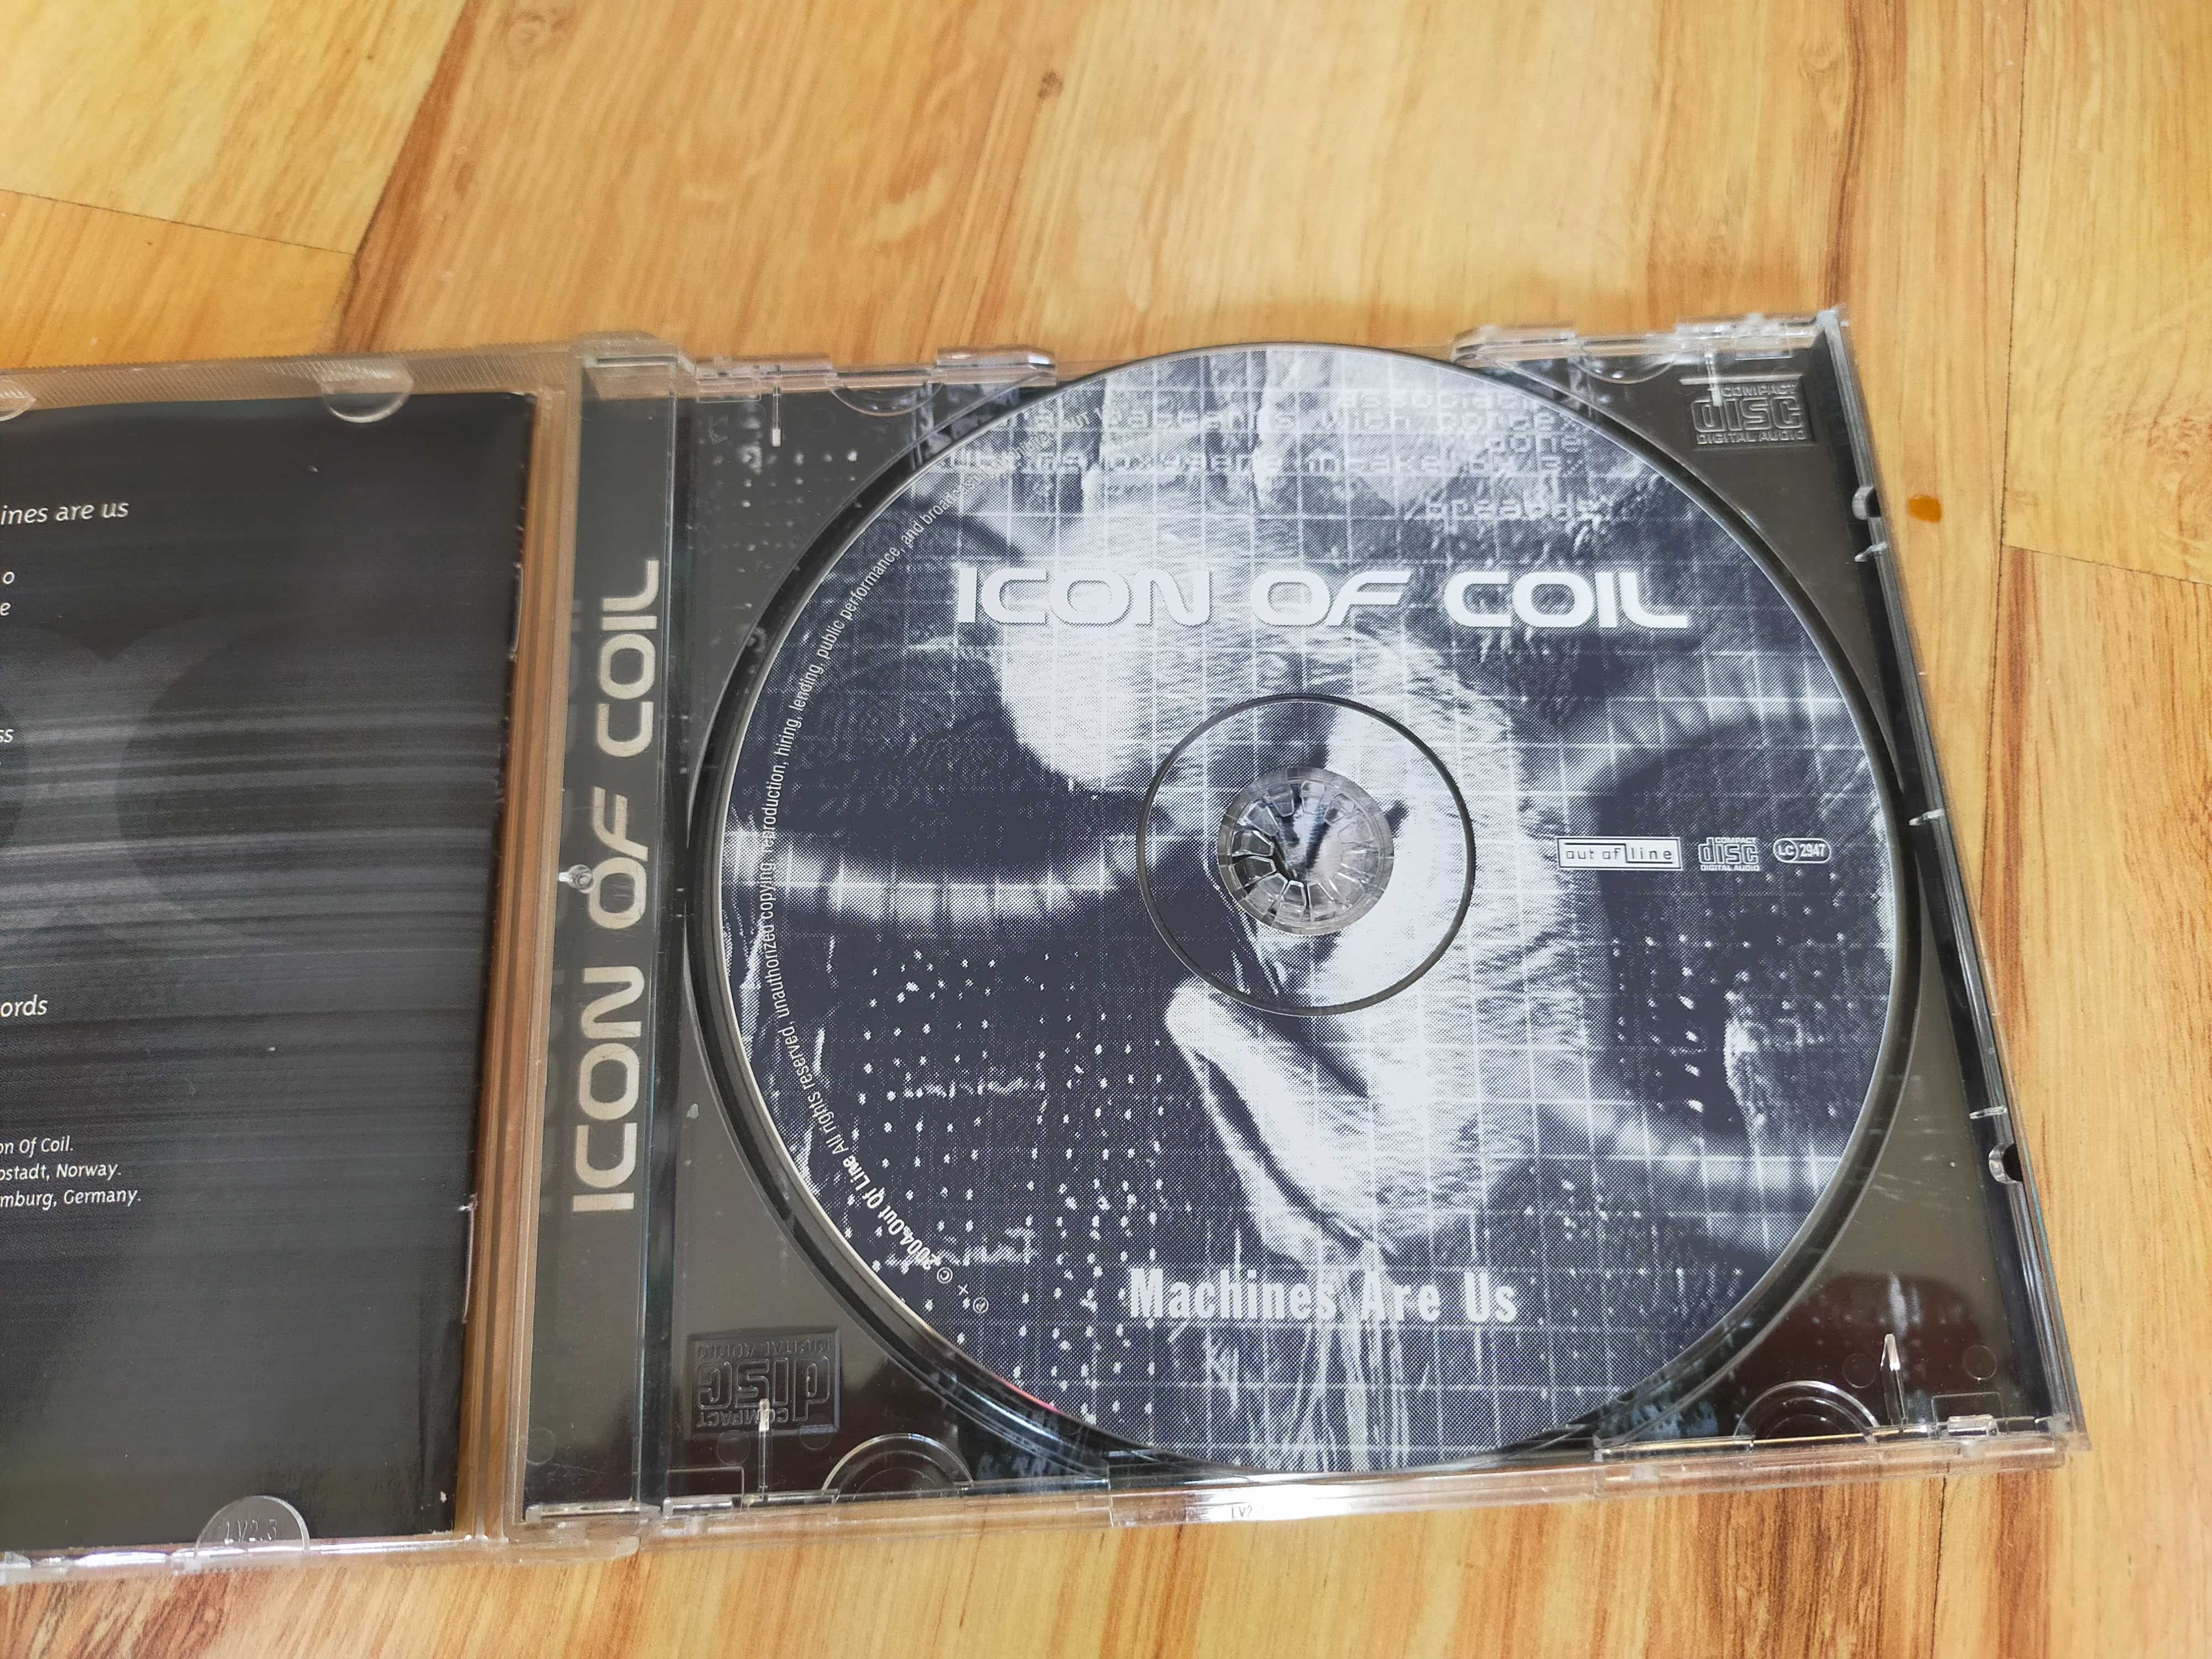 ICON OF COIL - "Machine Are Us" CD Jak nowa  Wyd. USA